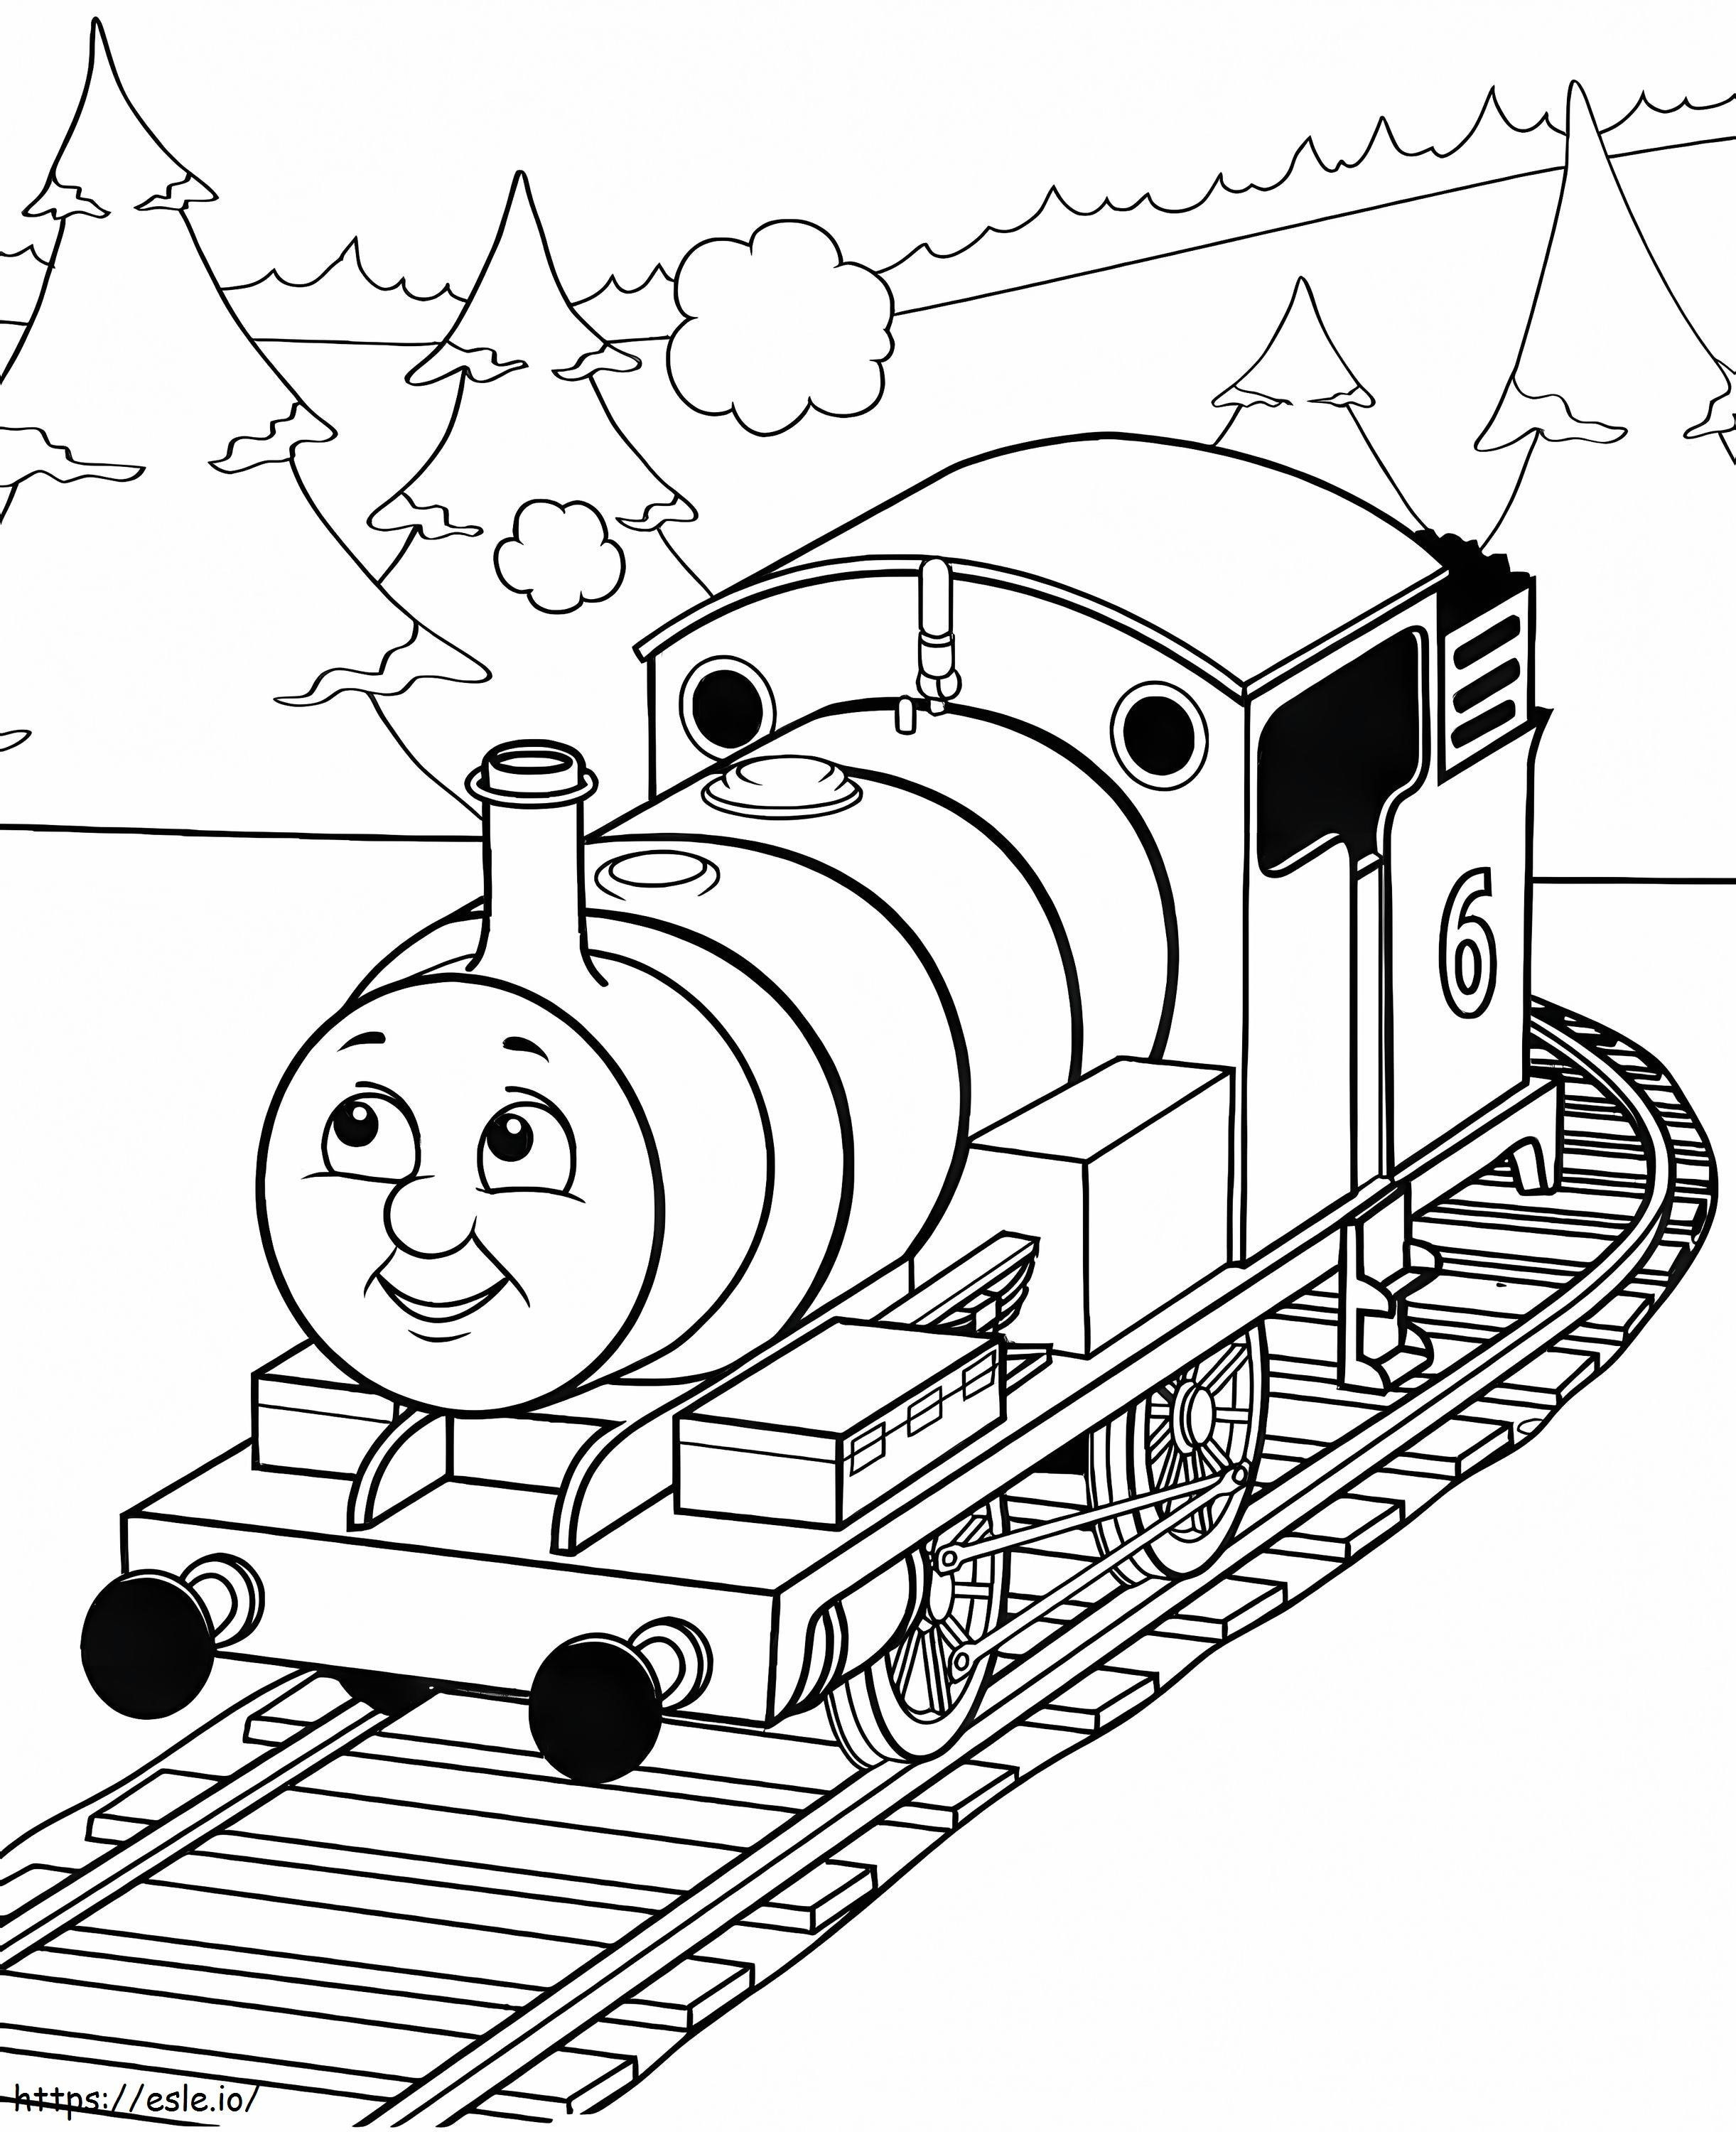 Thomas The Train And The Tree coloring page